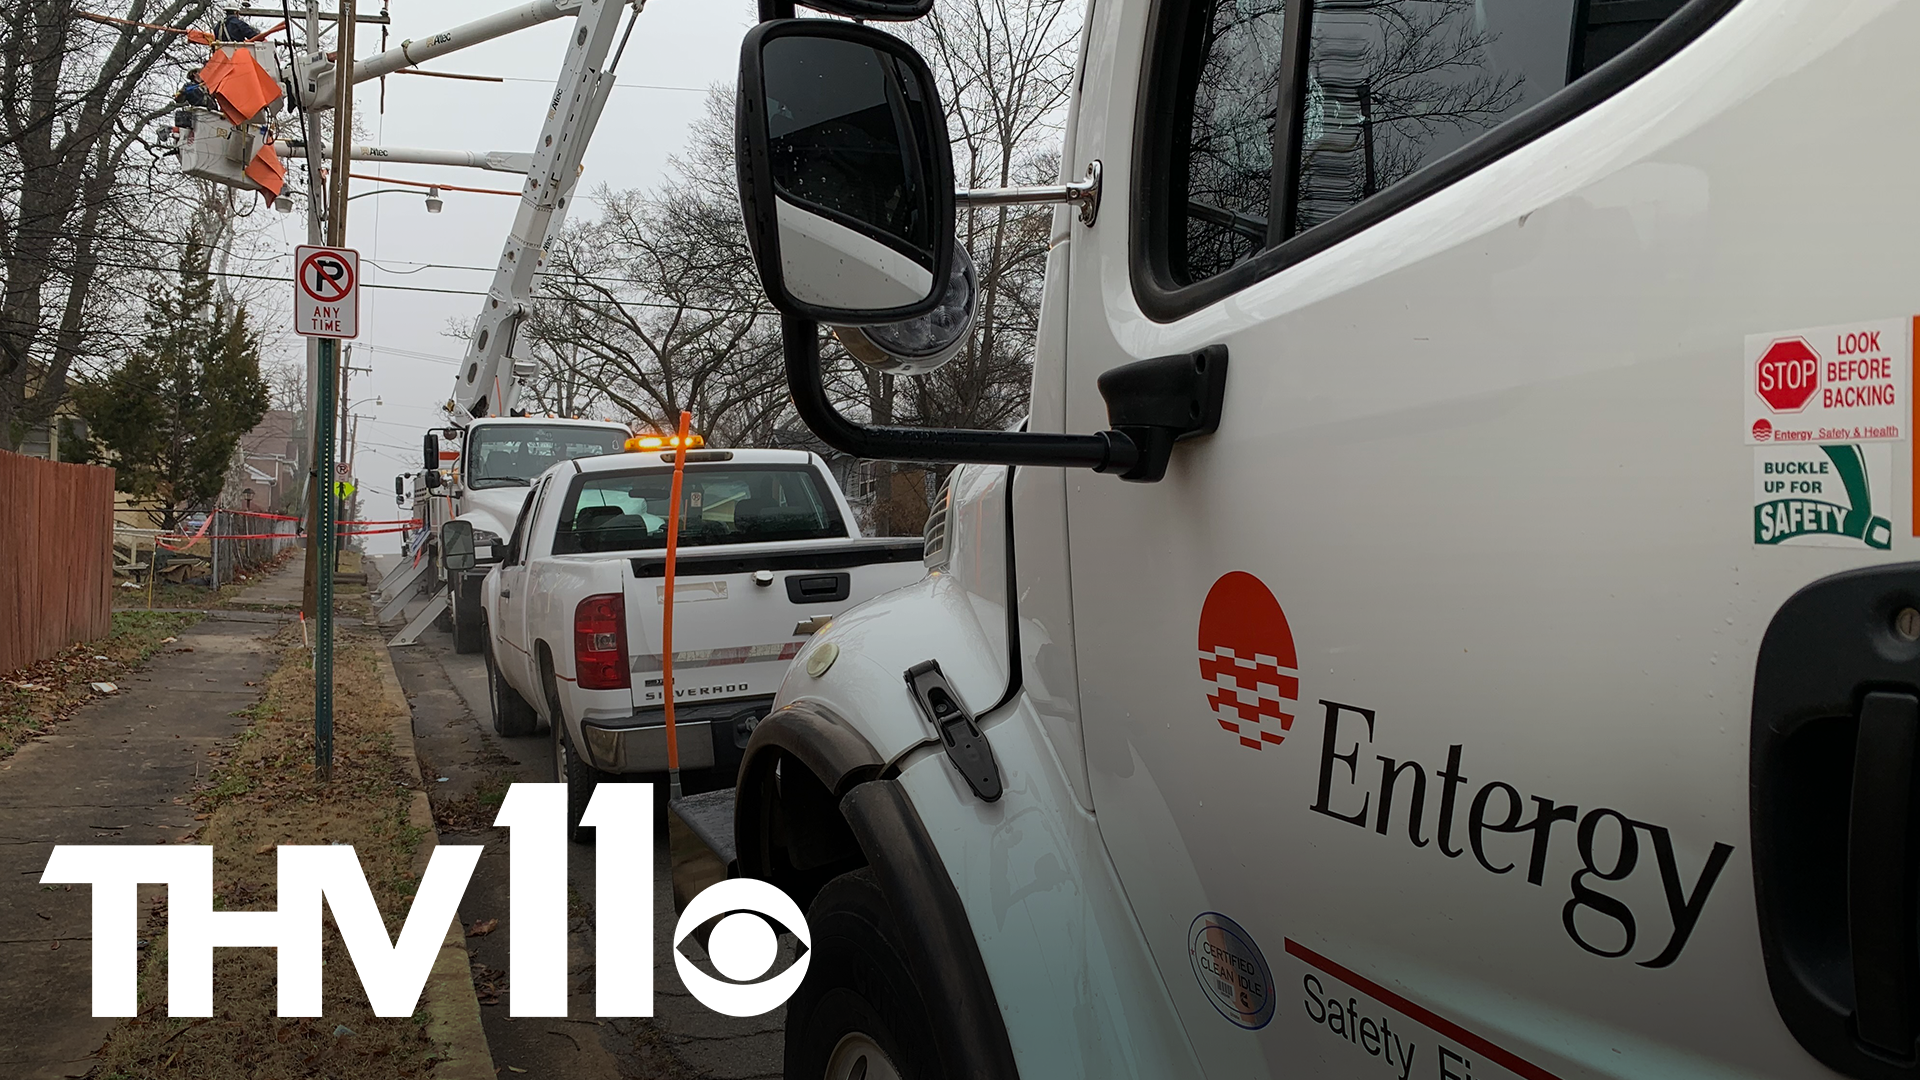 Power line workers don't have an easy job. And with ice in the forecast, it gets even more complicated. But they're always prepared.